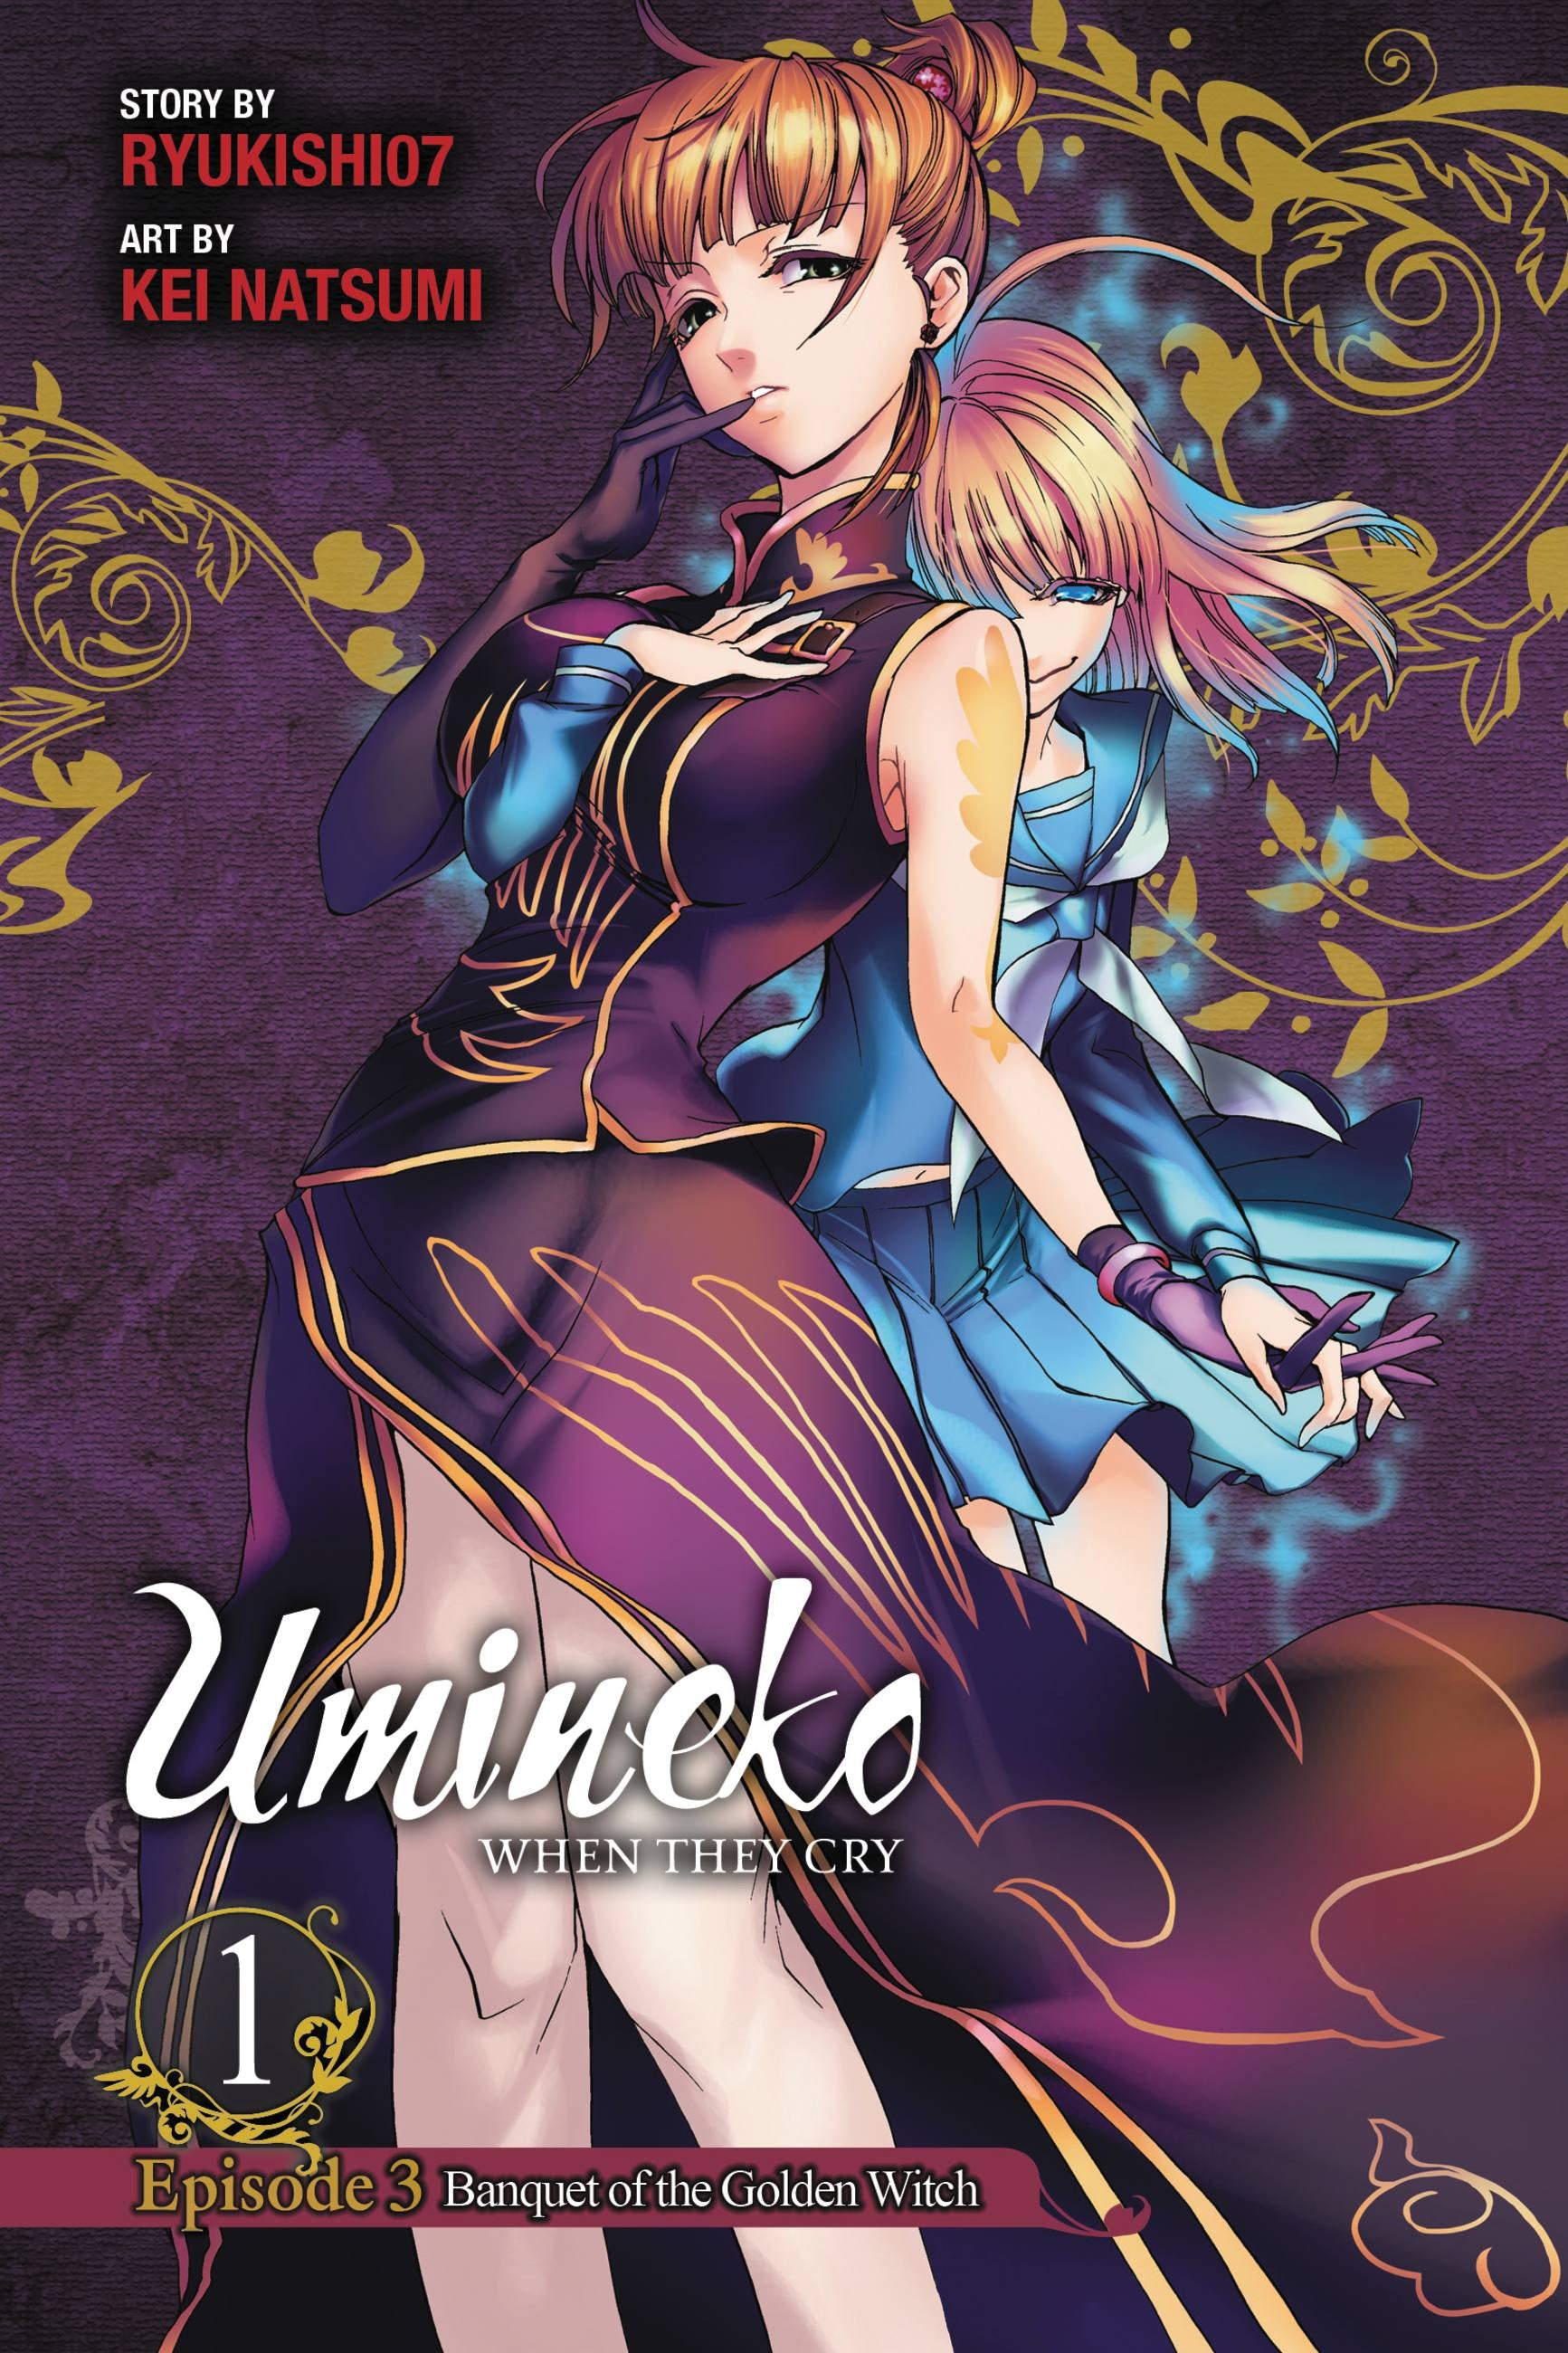 Product Image: Umineko WHEN THEY CRY Episode 3: Banquet of the Golden Witch, Vol. 1